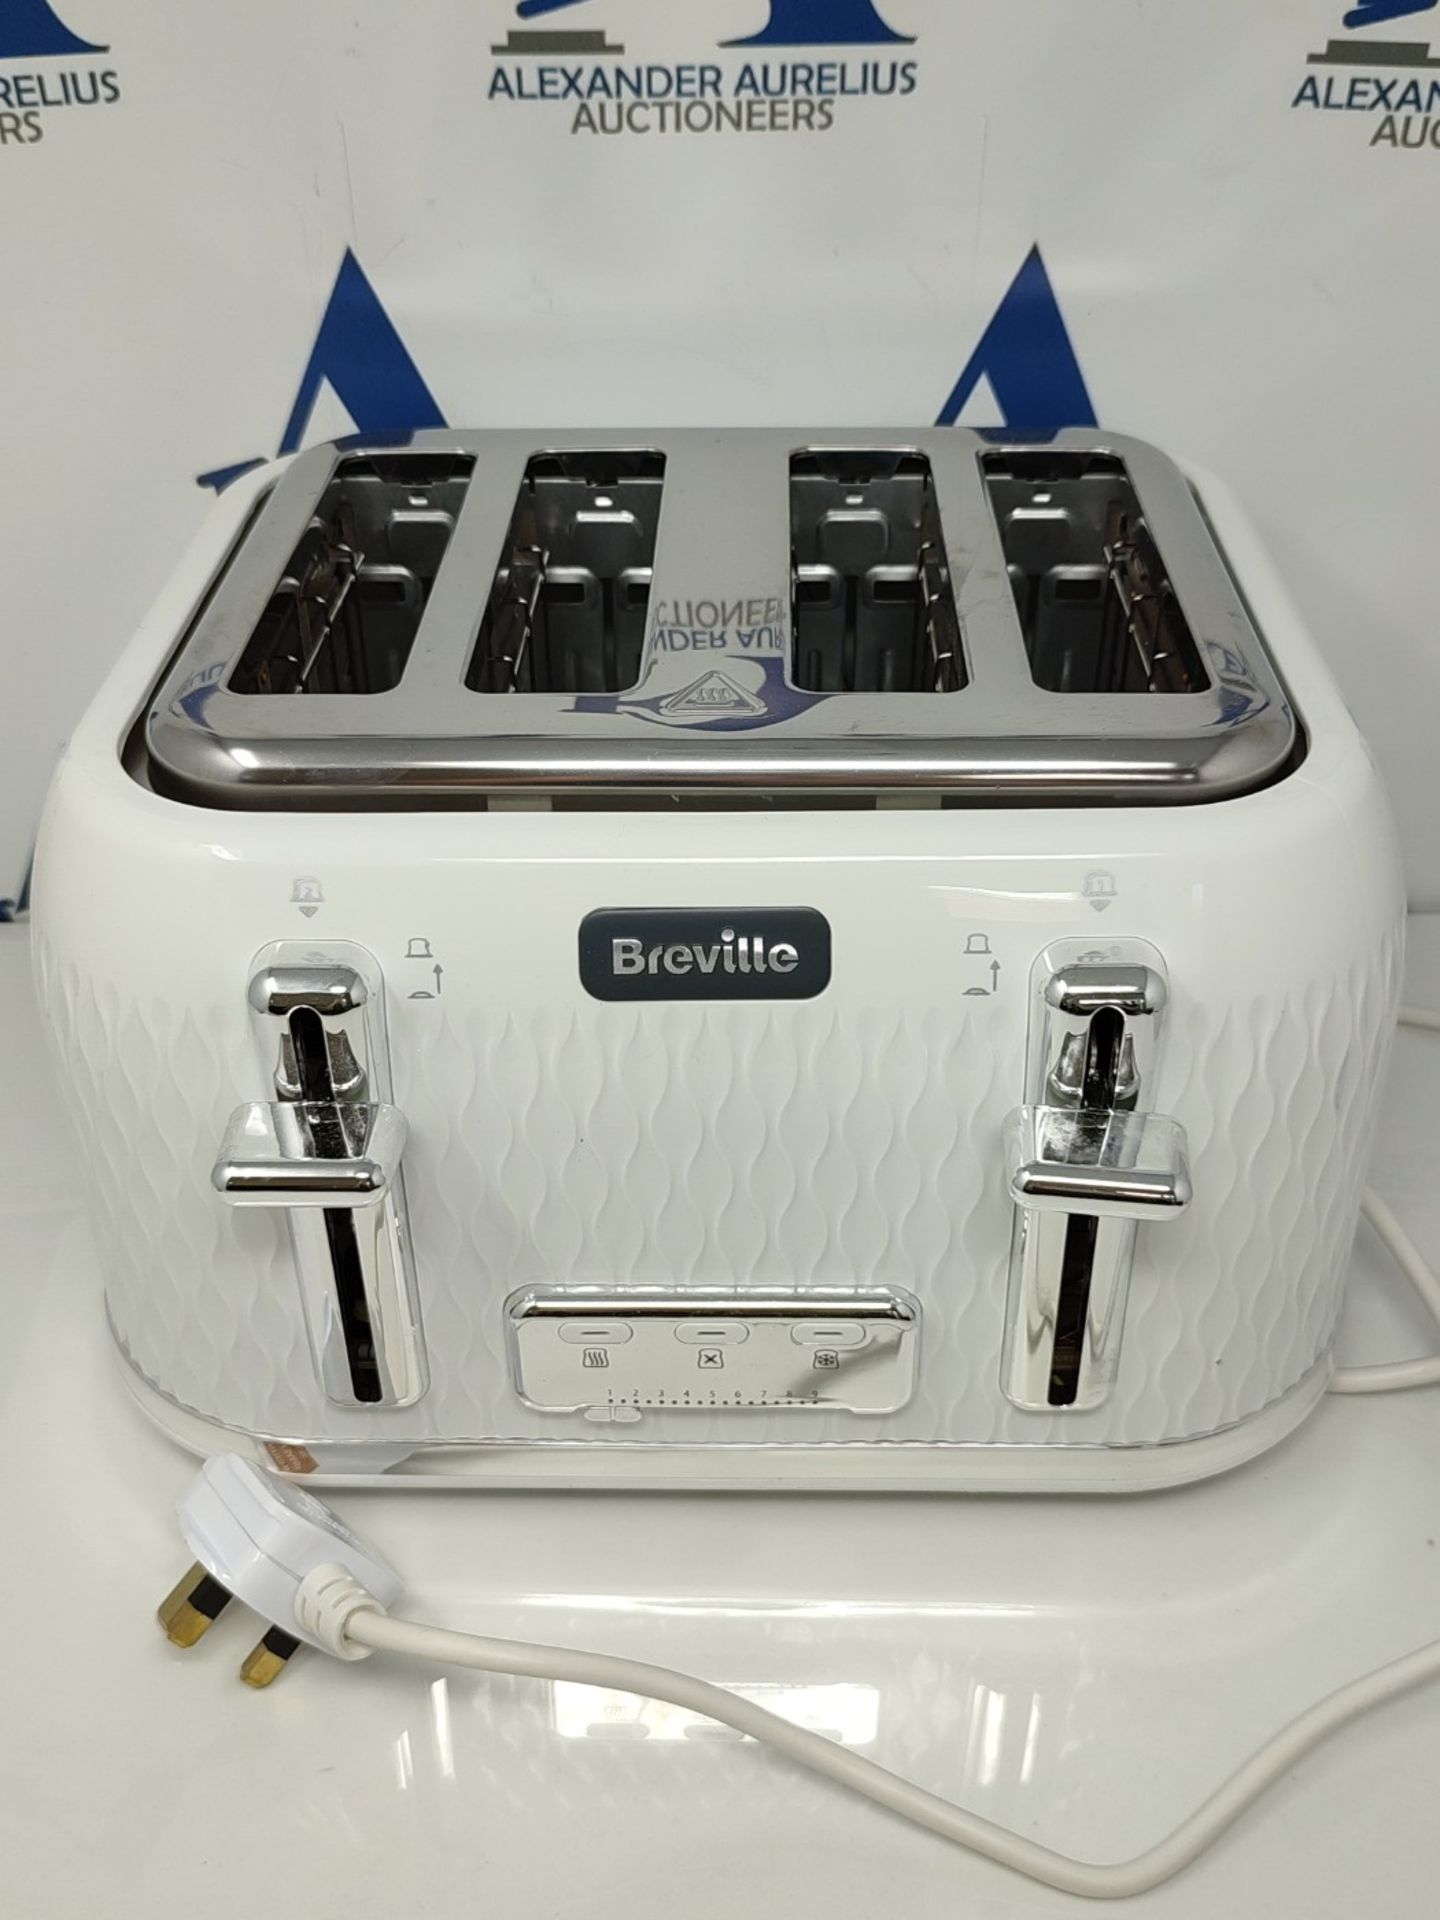 Breville Curve 4-Slice Toaster with High Lift and Wide Slots | White & Chrome [VTT911] - Image 3 of 3